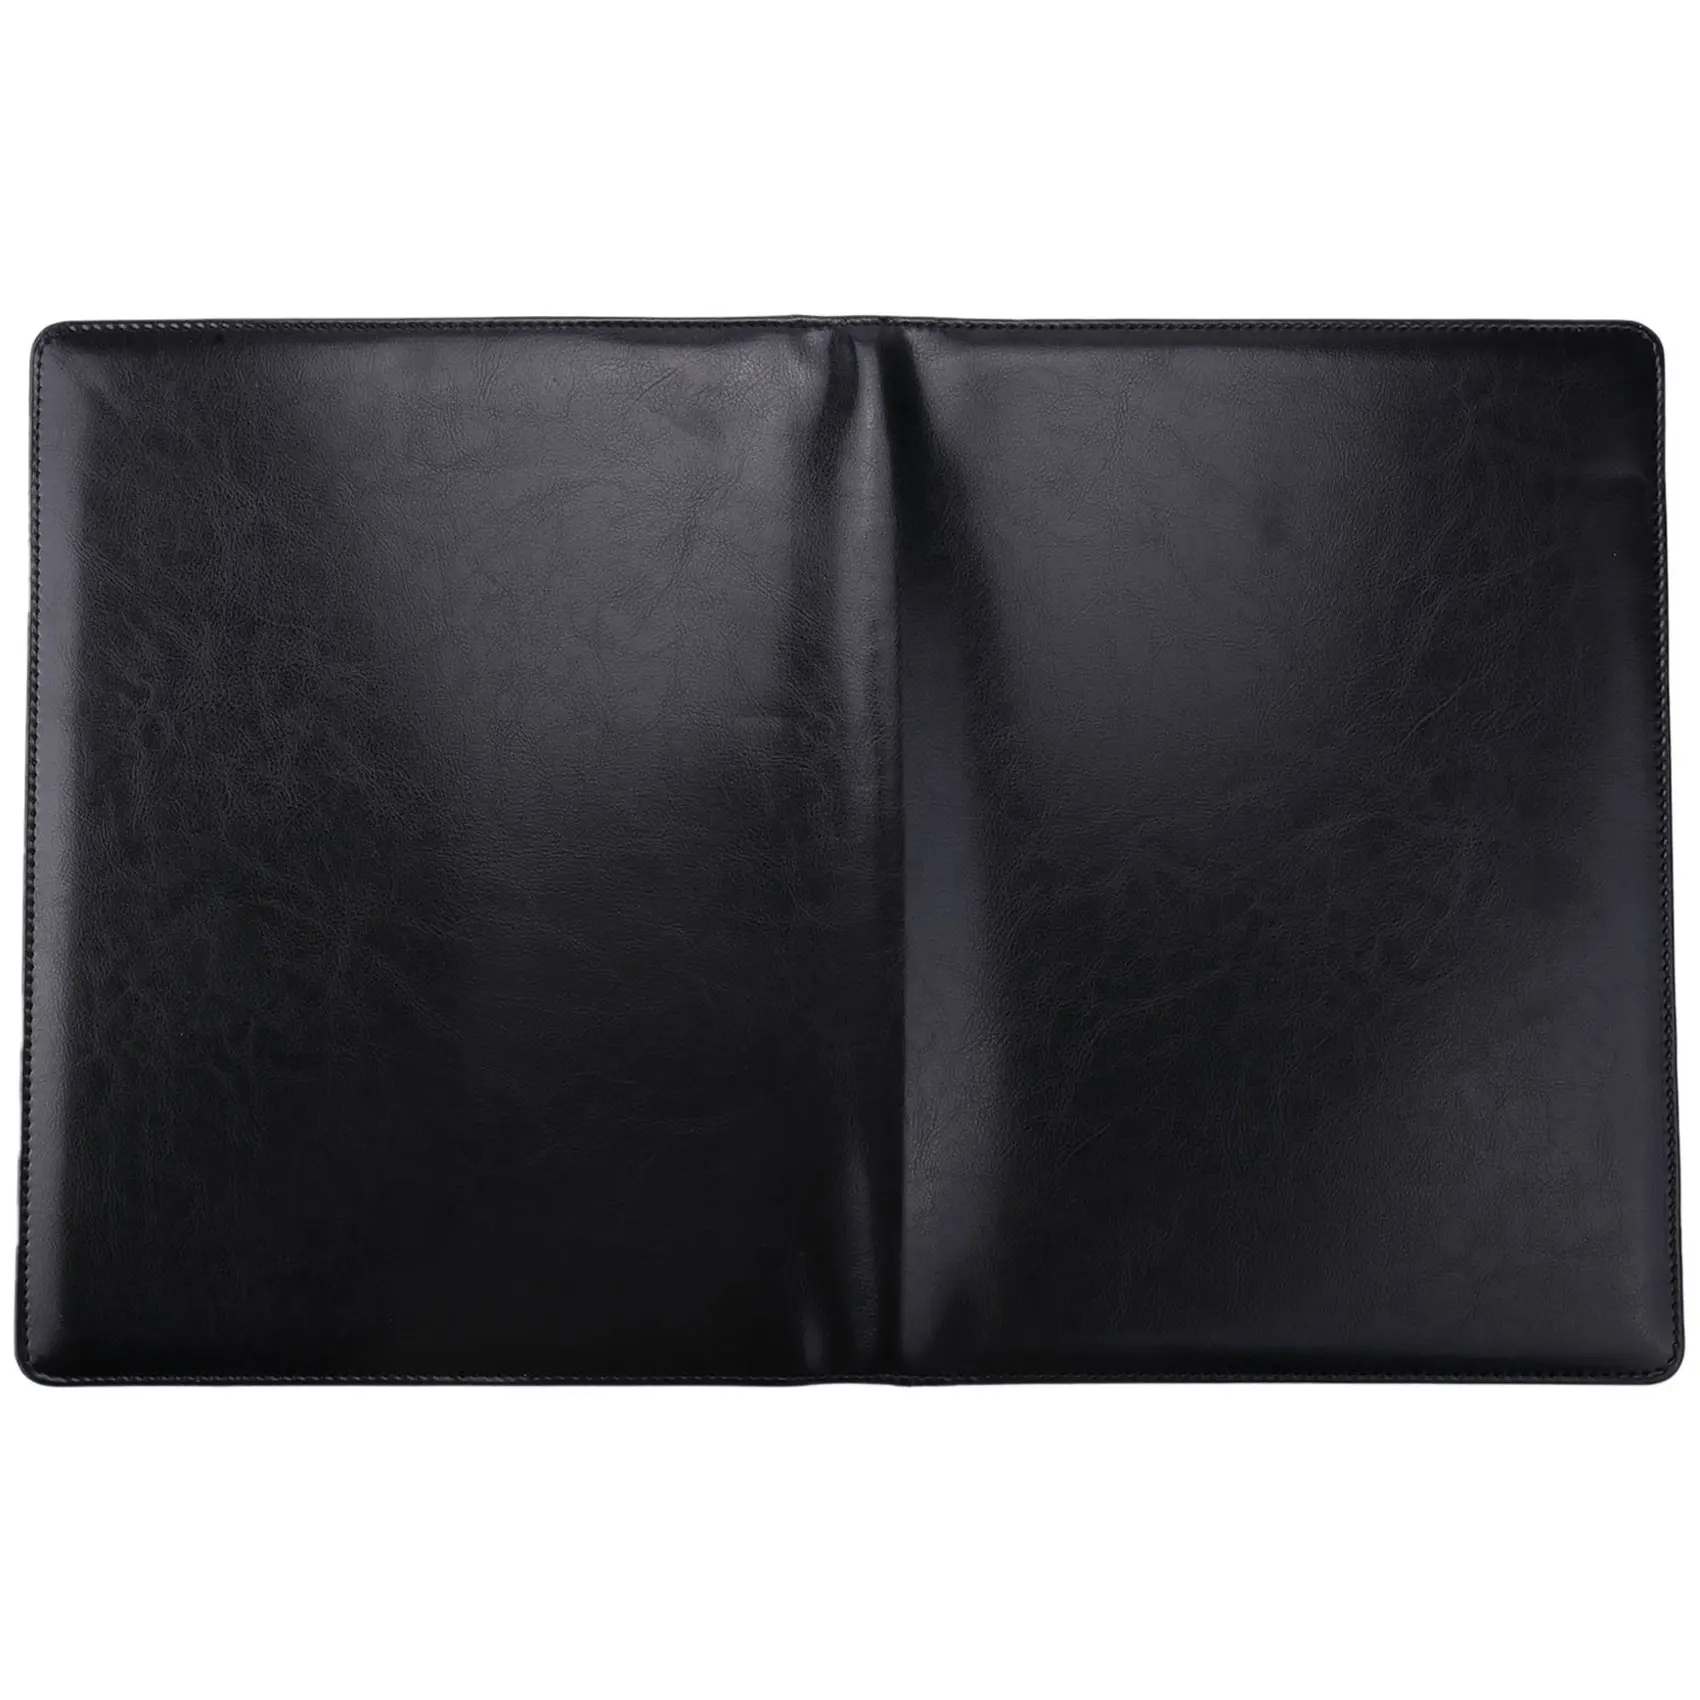 

A4 Clipboard Multi-Function Filling Products Folder for Documents School Office Supplies Organizer Leather Portfolio,Black 2 Pcs